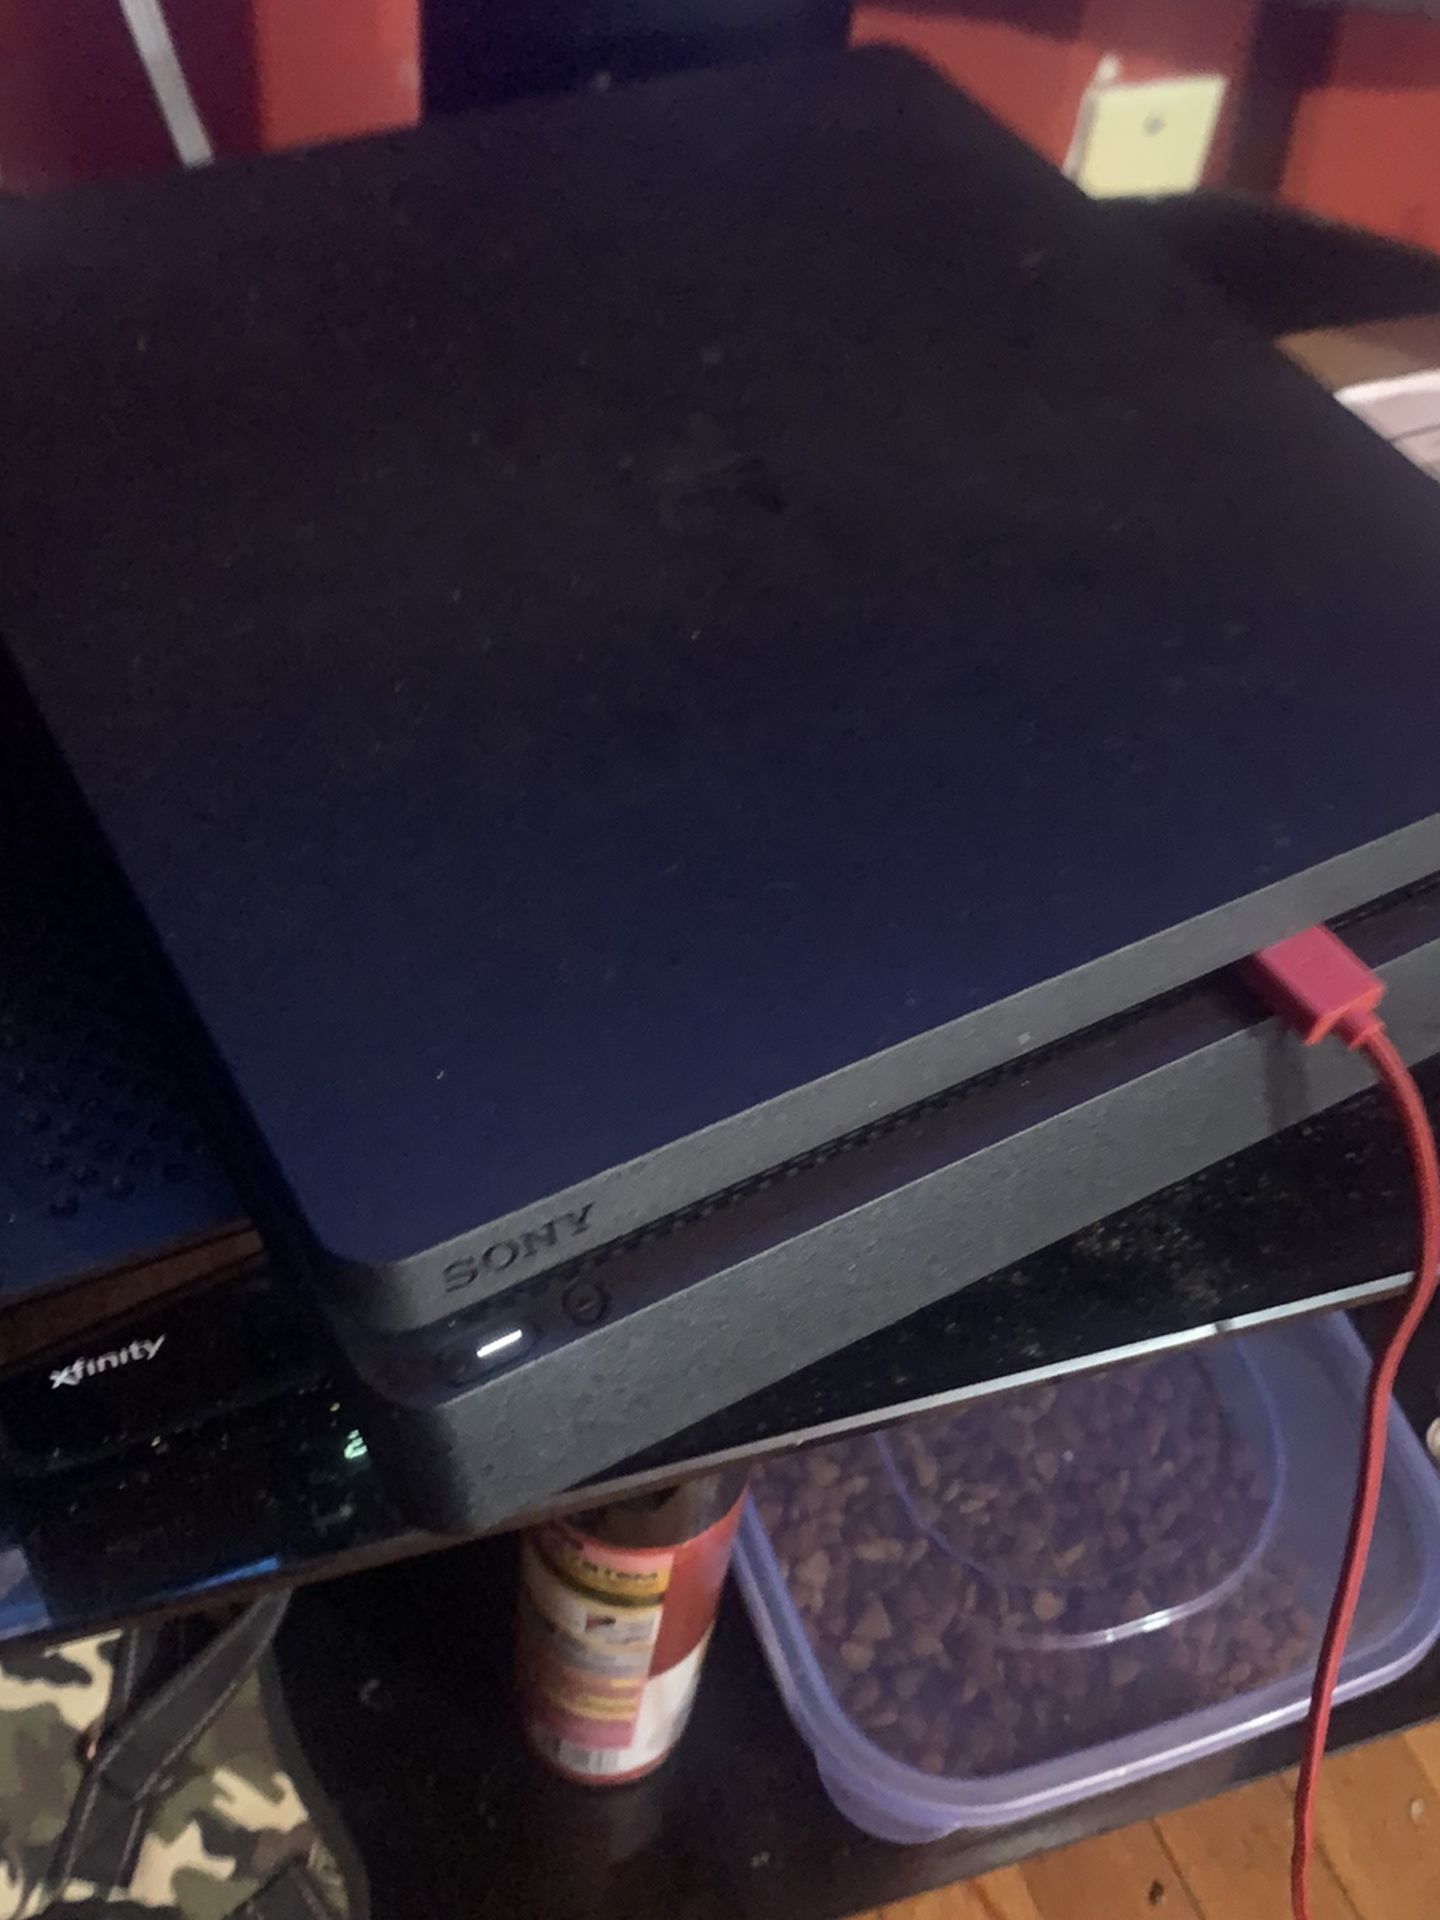 PS4 Pro Slim Tb With Games Installed